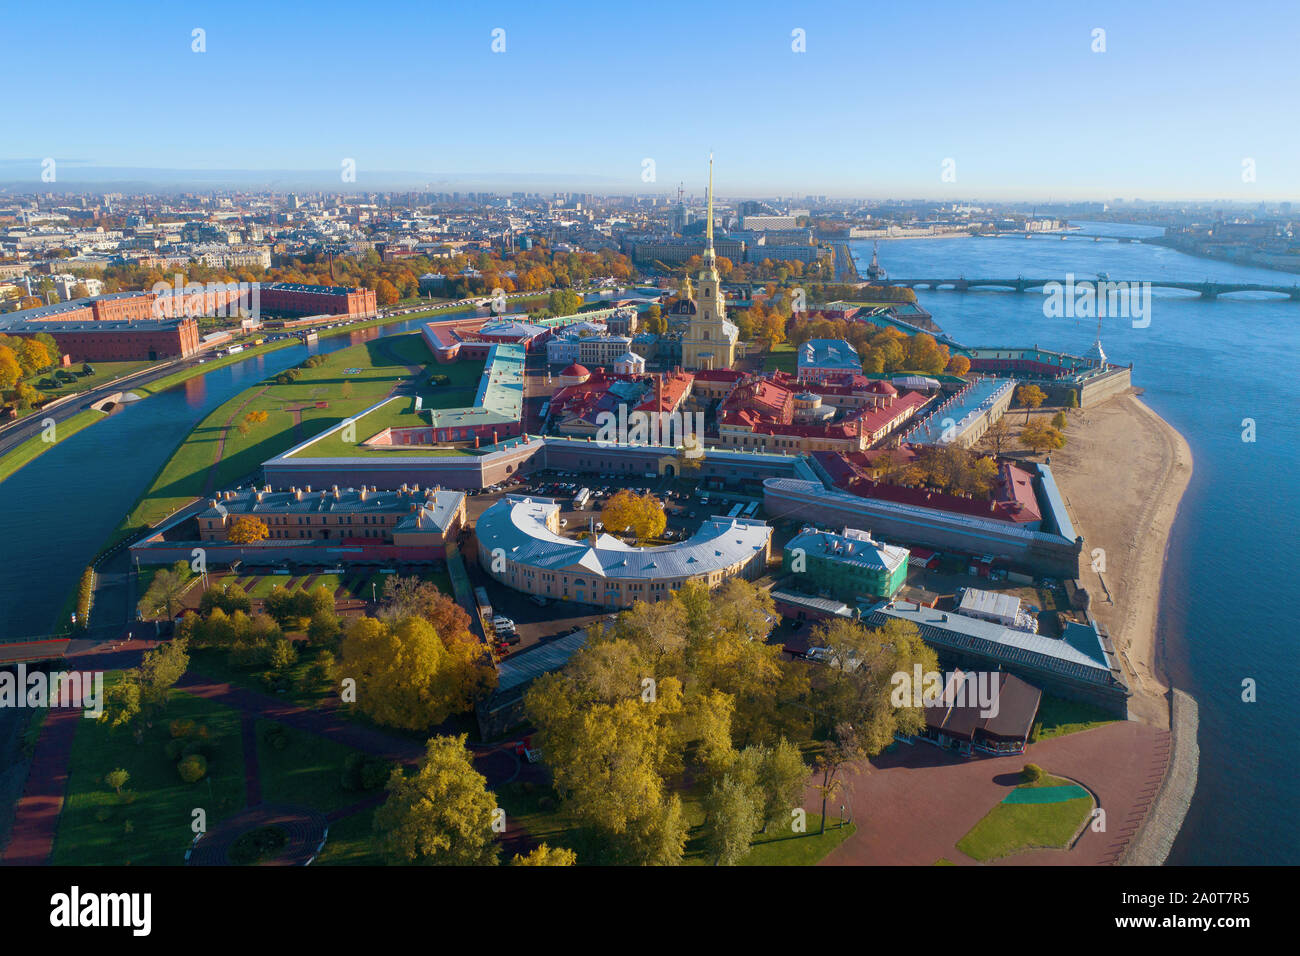 View of the Peter and Paul Fortress on a sunny October day (shooting from a quadcopter). Saint-Petersburg, Russia Stock Photo